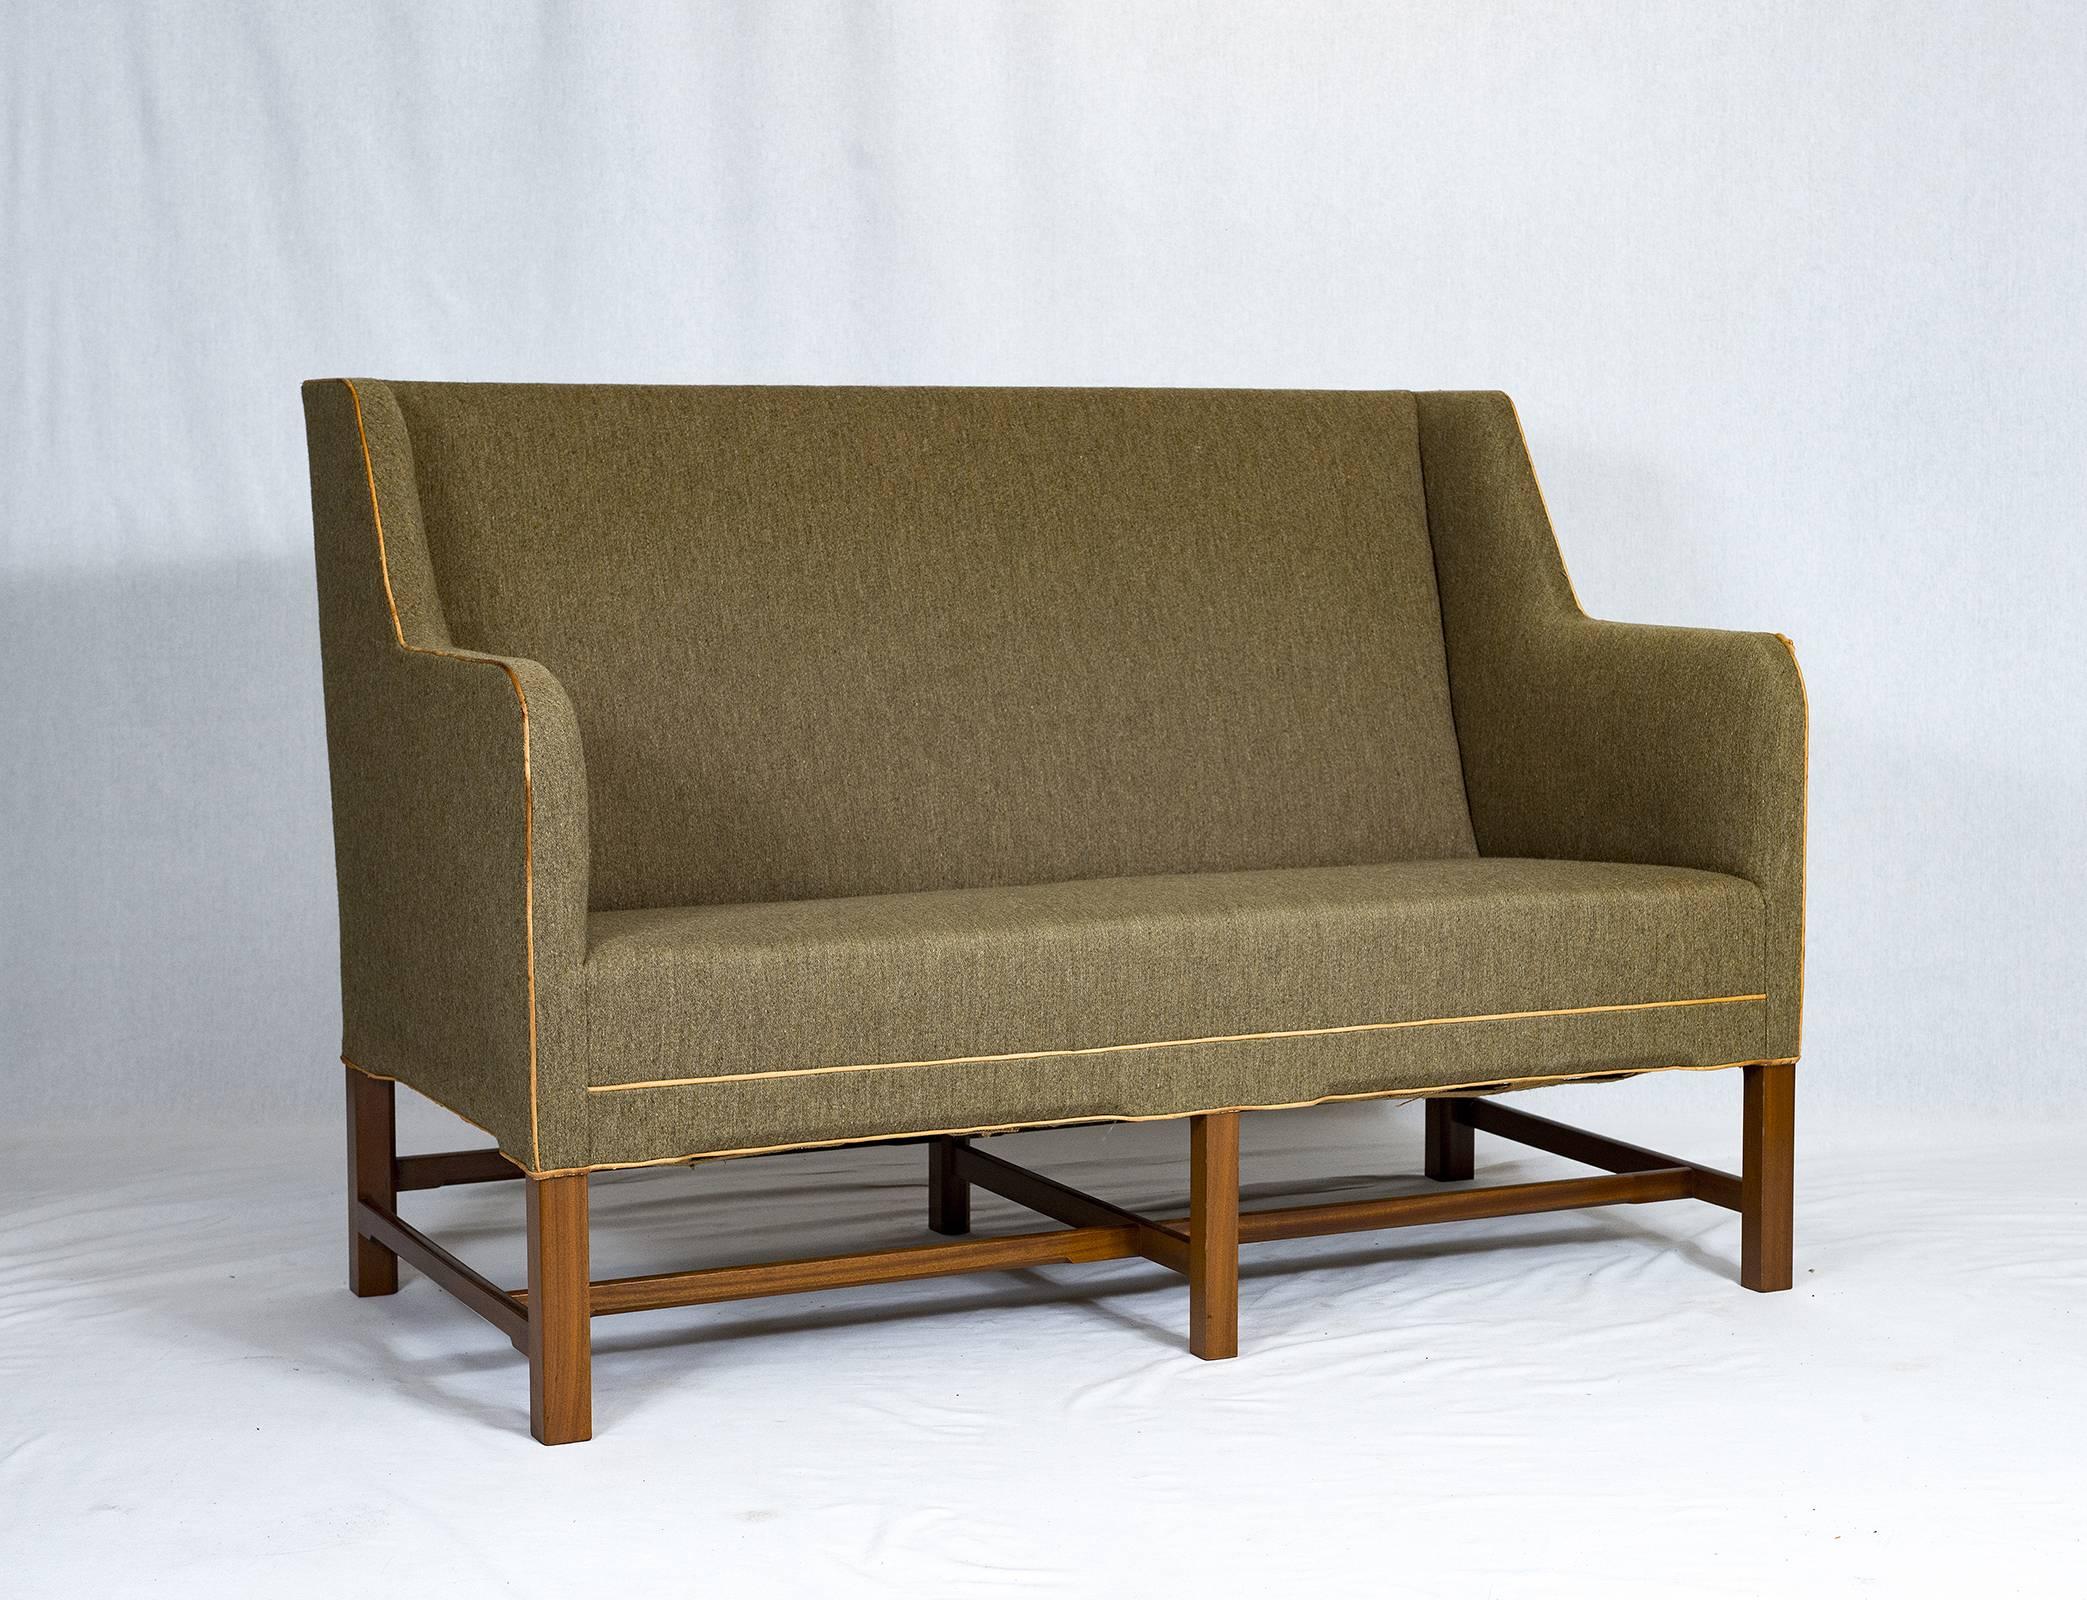 Kaare Klint settee designed in 1935 and produced by Rud Rasmussen.    Store formerly known as ARTFUL DODGER INC